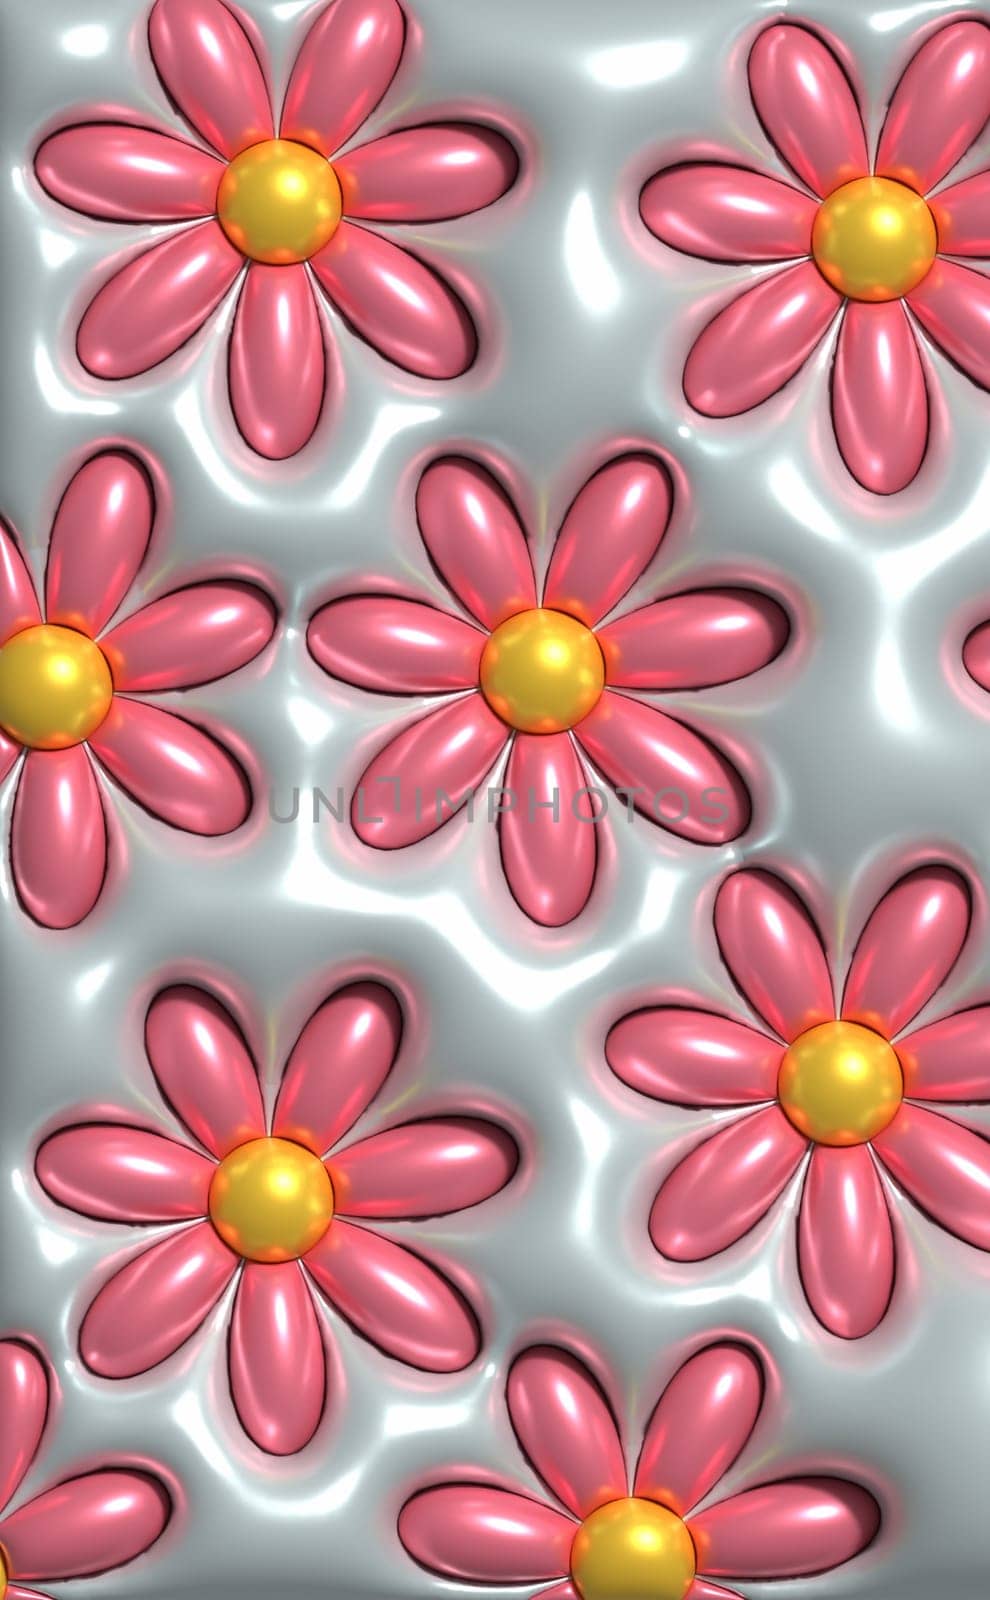 Pink flowers on a gray background, 3D rendering illustration